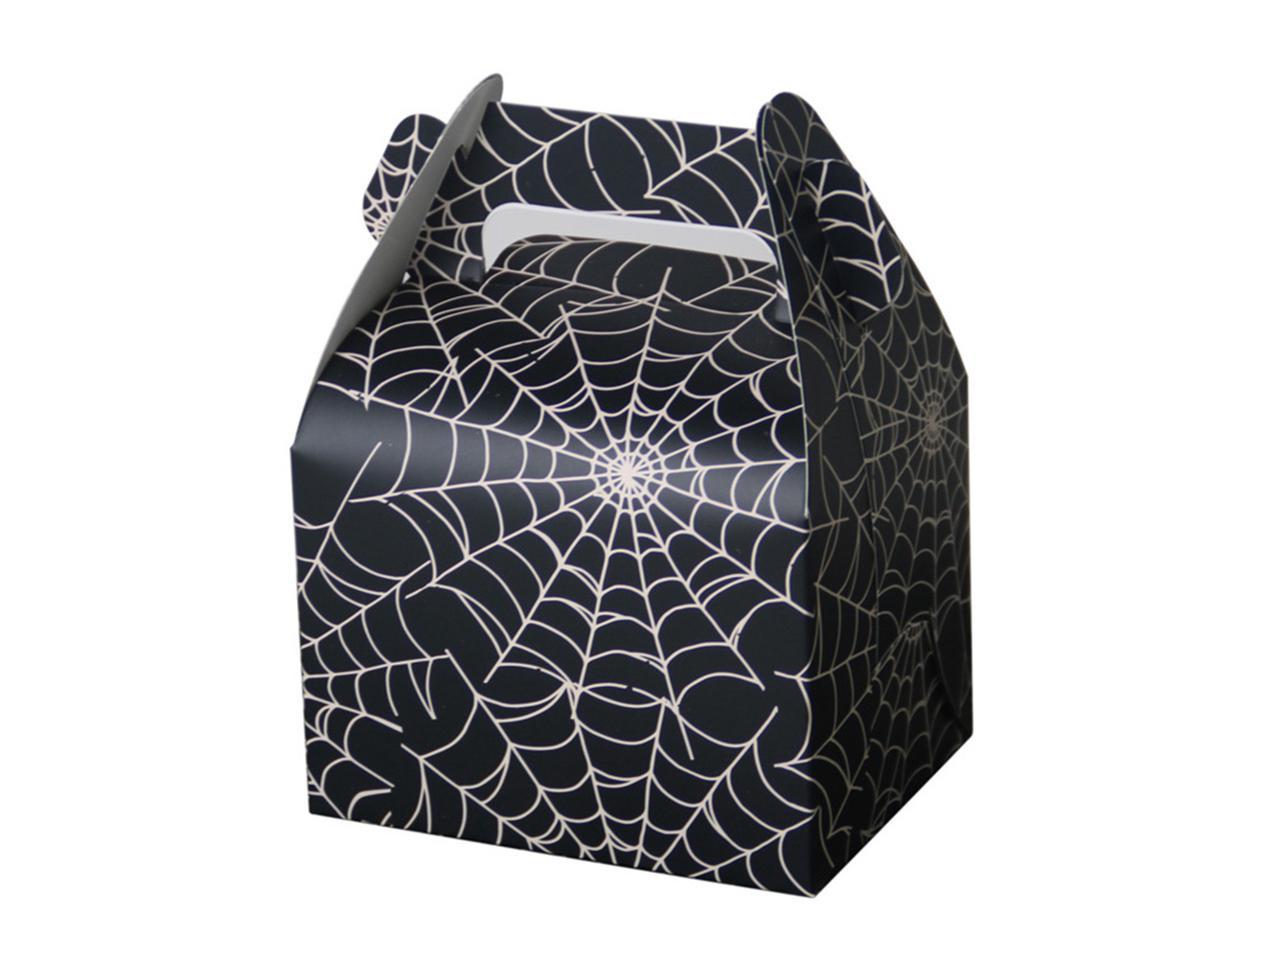 20pcs Portable Candy Boxes Halloween Treat Paper Bags Spiderweb Halloween Party Favor Boxes for Party Supplies Kids Birthday Decorations